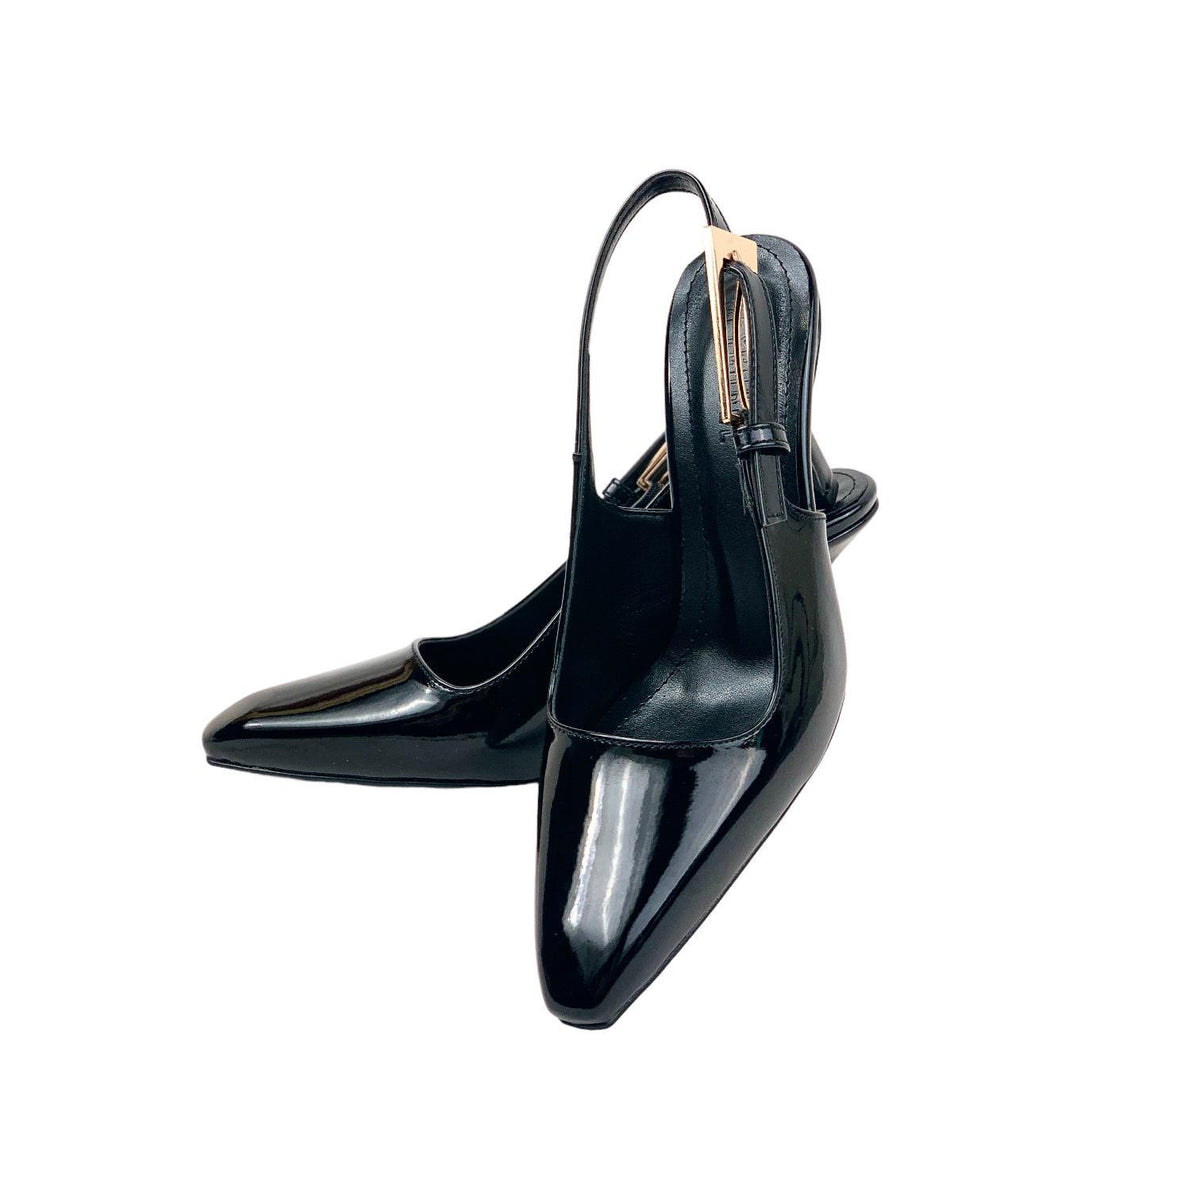 Women's Lery Black Patent Leather Heeled Shoes 9 cm - STREETMODE™